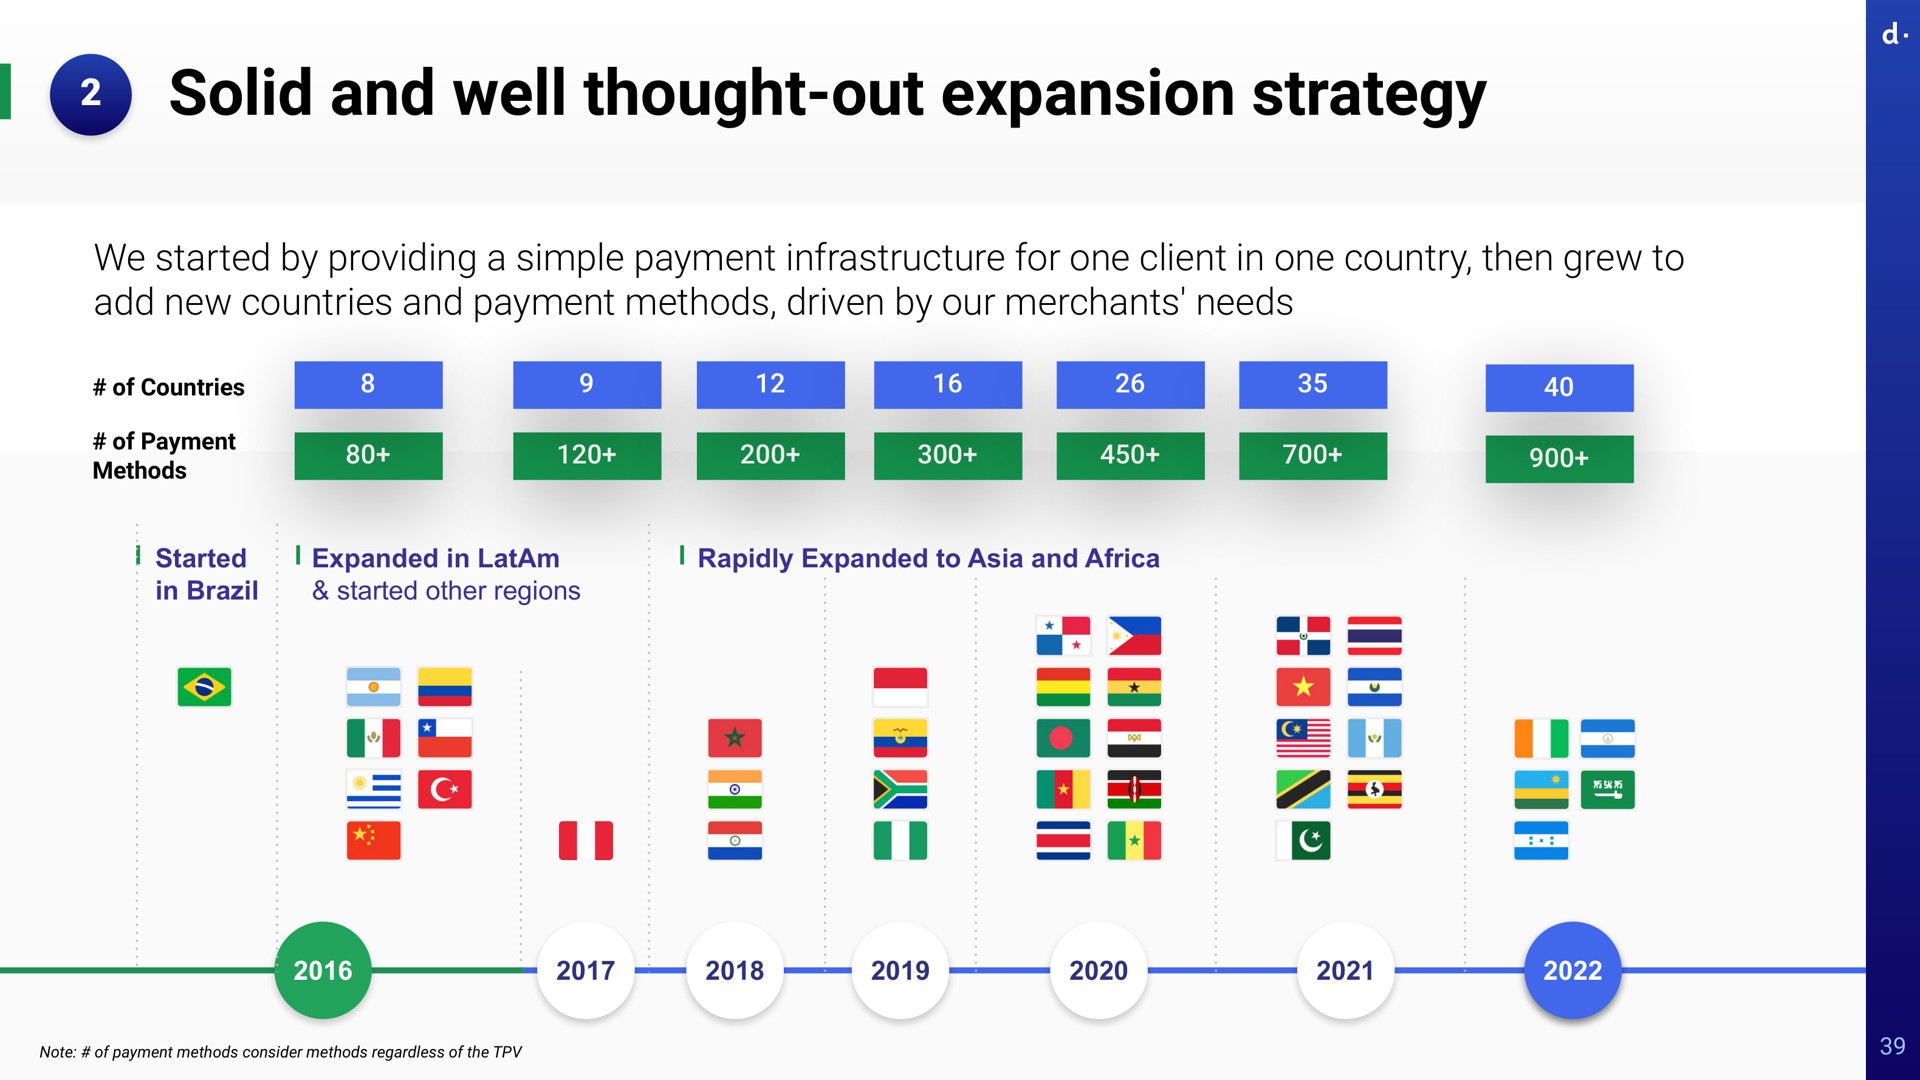 solid and well thought out expansion strategy we started by providing a simple payment infrastructure for one client in one country then grew to add new countries and payment methods driven by our merchants needs of countries of payment methods started in brazil expanded in started other regions rapidly expanded to and i i am ies i ram note consider regardless the | dLocal